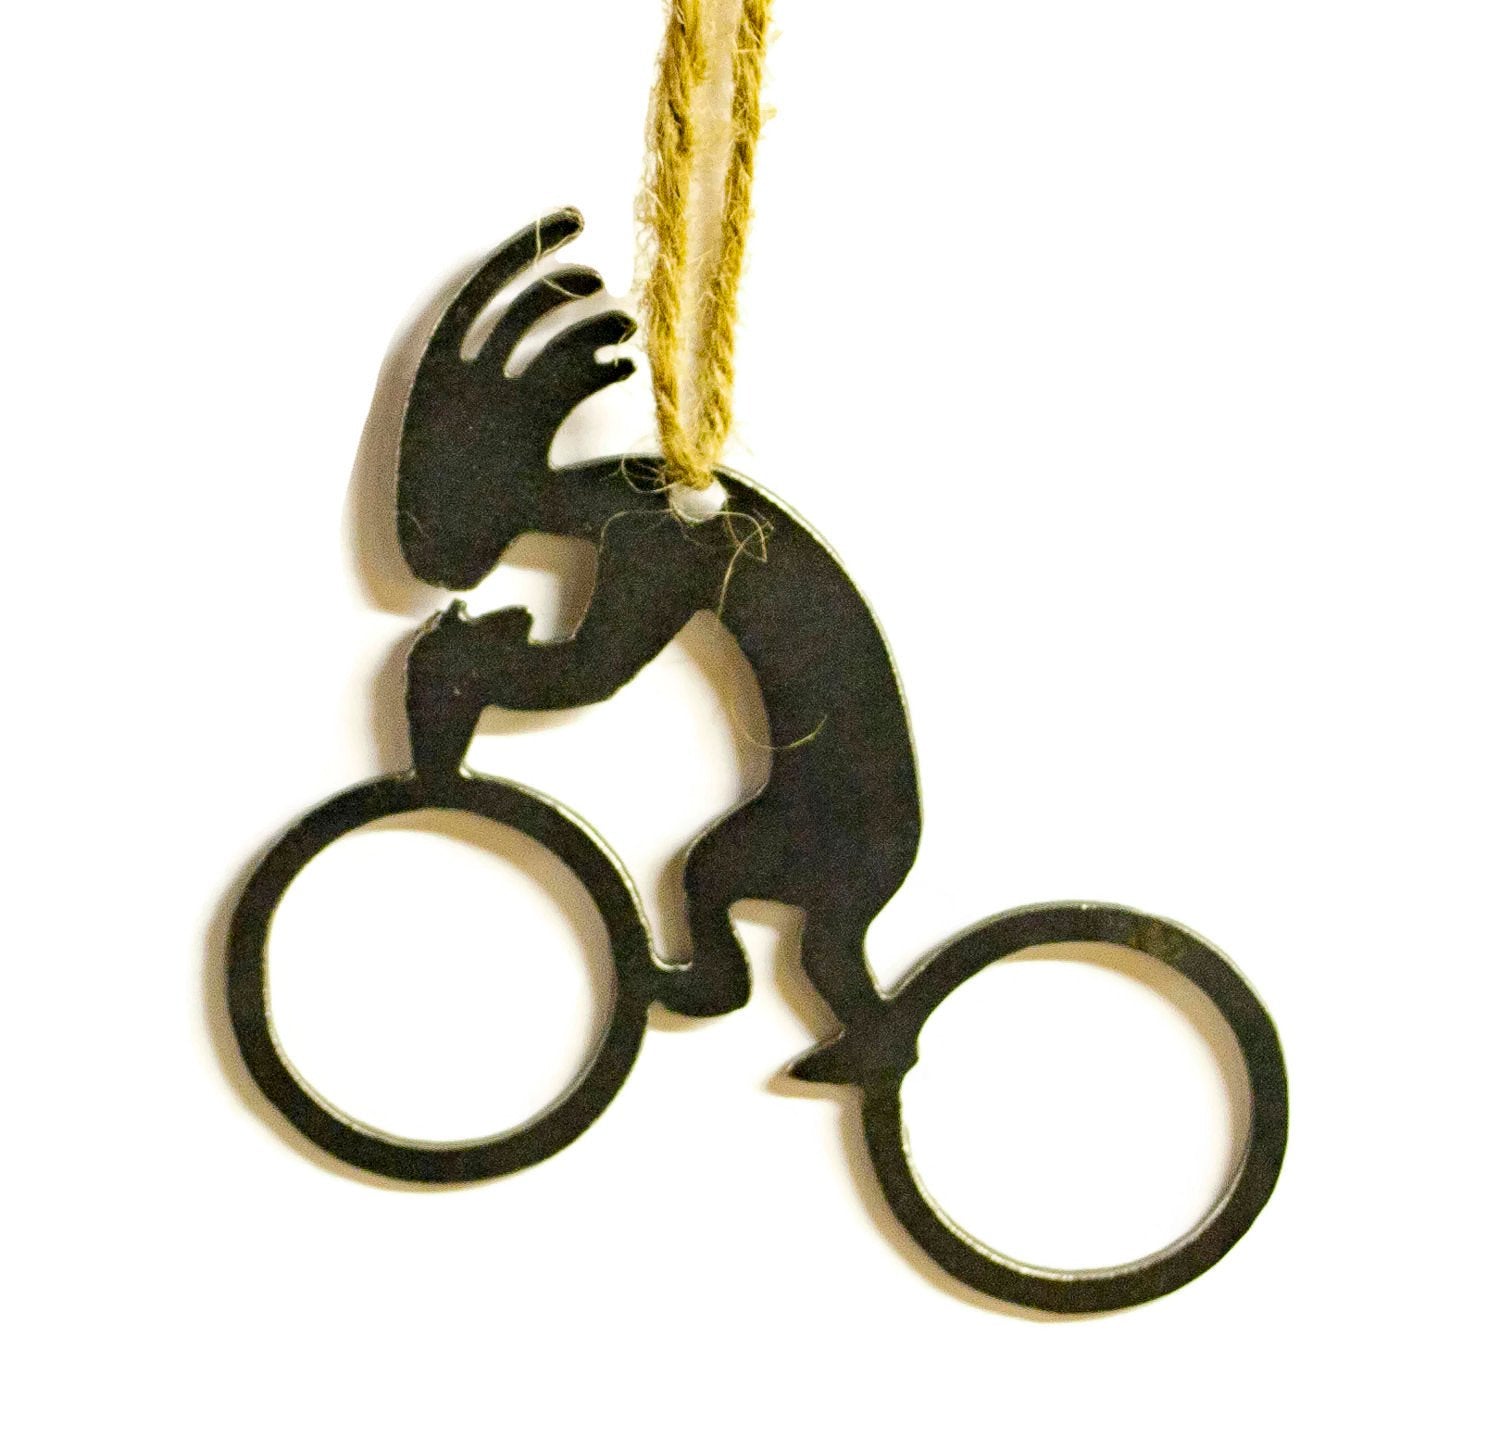 Kokopelli Bicycle Cyclist Metal Christmas Tree Ornament Southwestern Holiday Gift Home Decoration Raw Steel Ironwork Decor Recycled